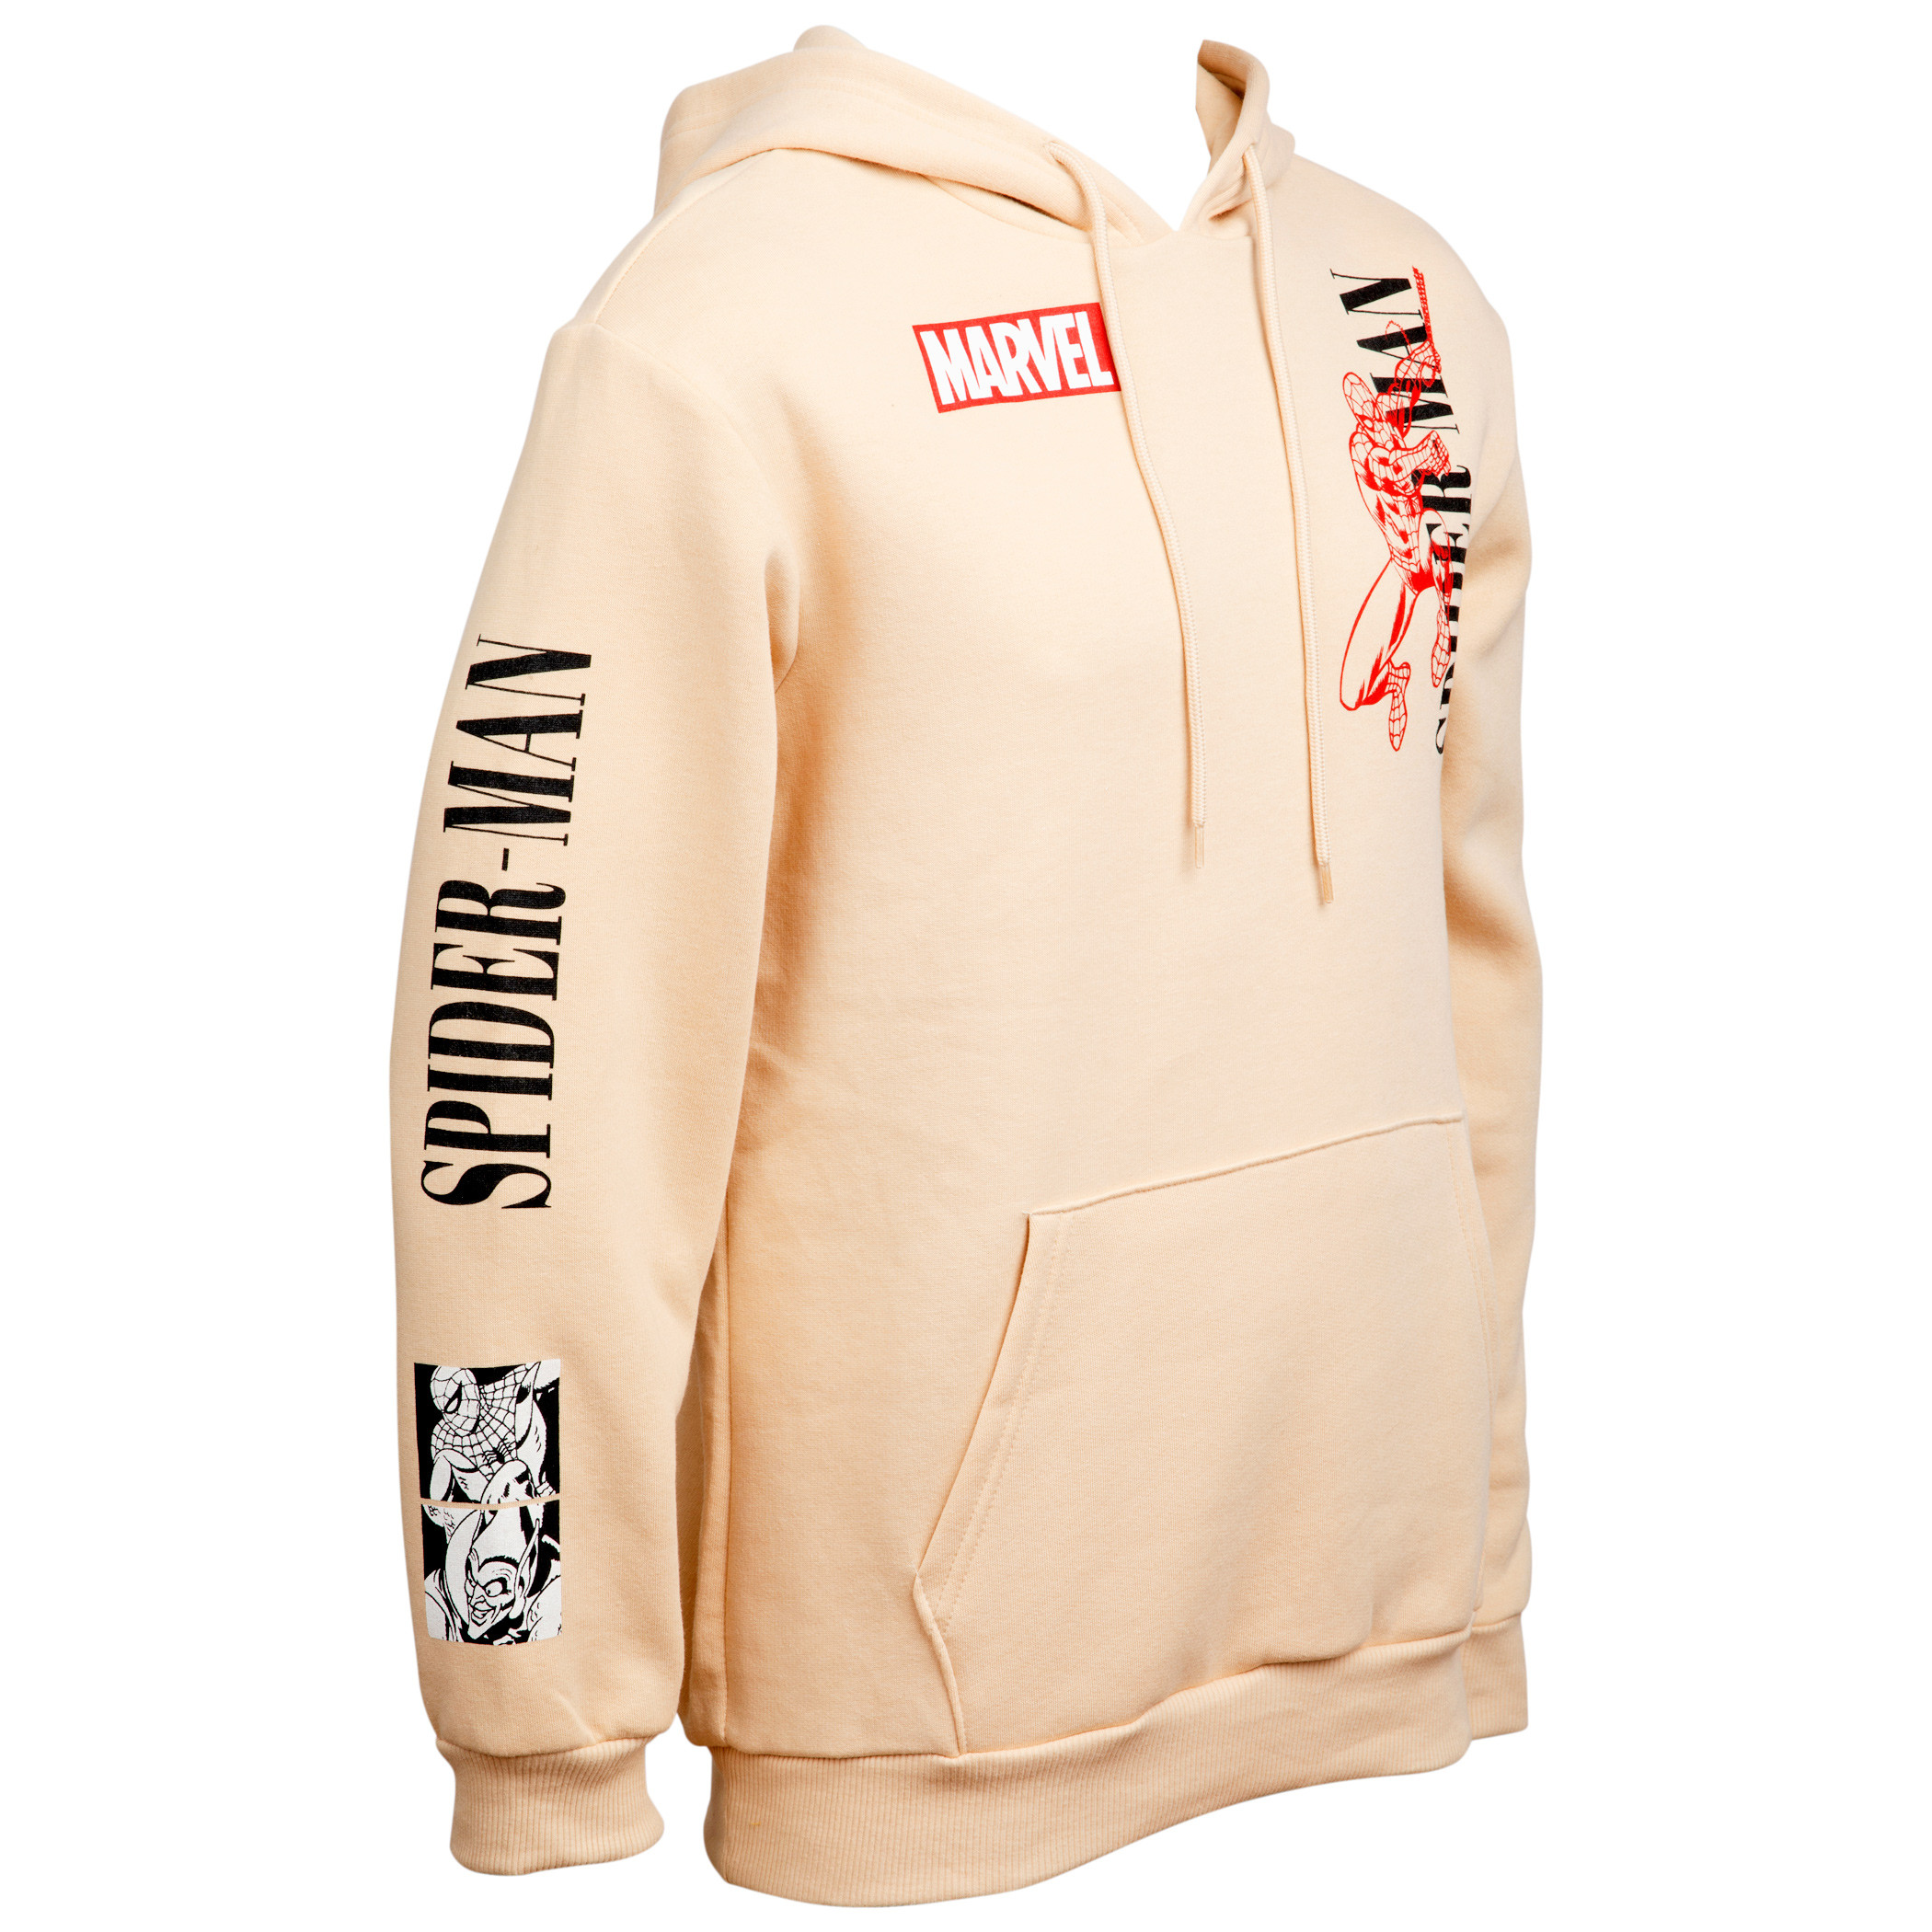 Spider-Man Character And Text Hoodie With Back And Sleeve Print